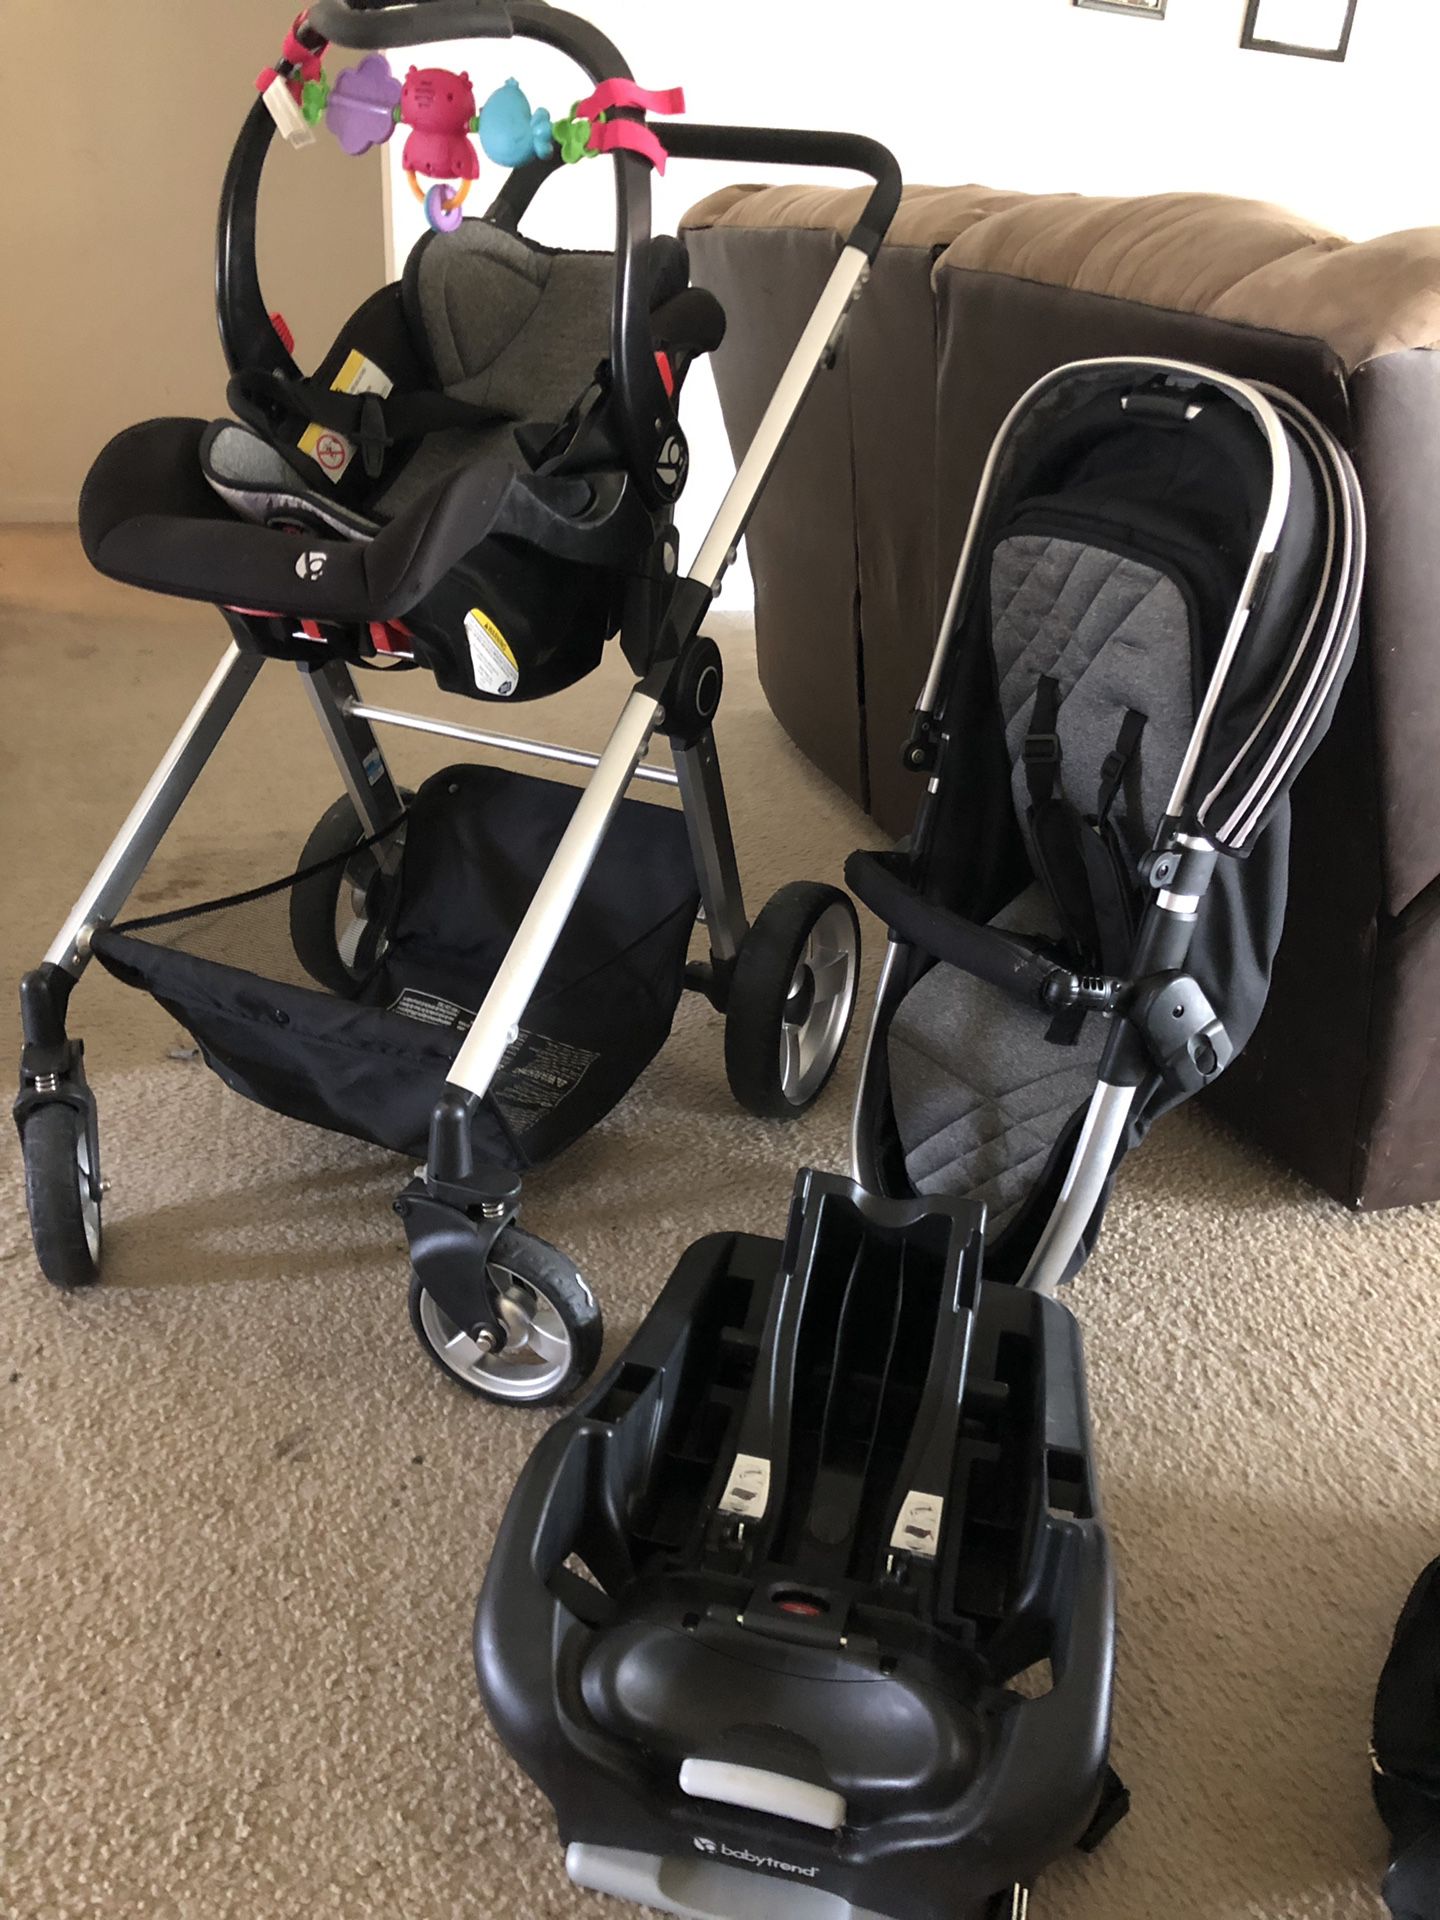 Baby Trend car seat/stroller combo like new